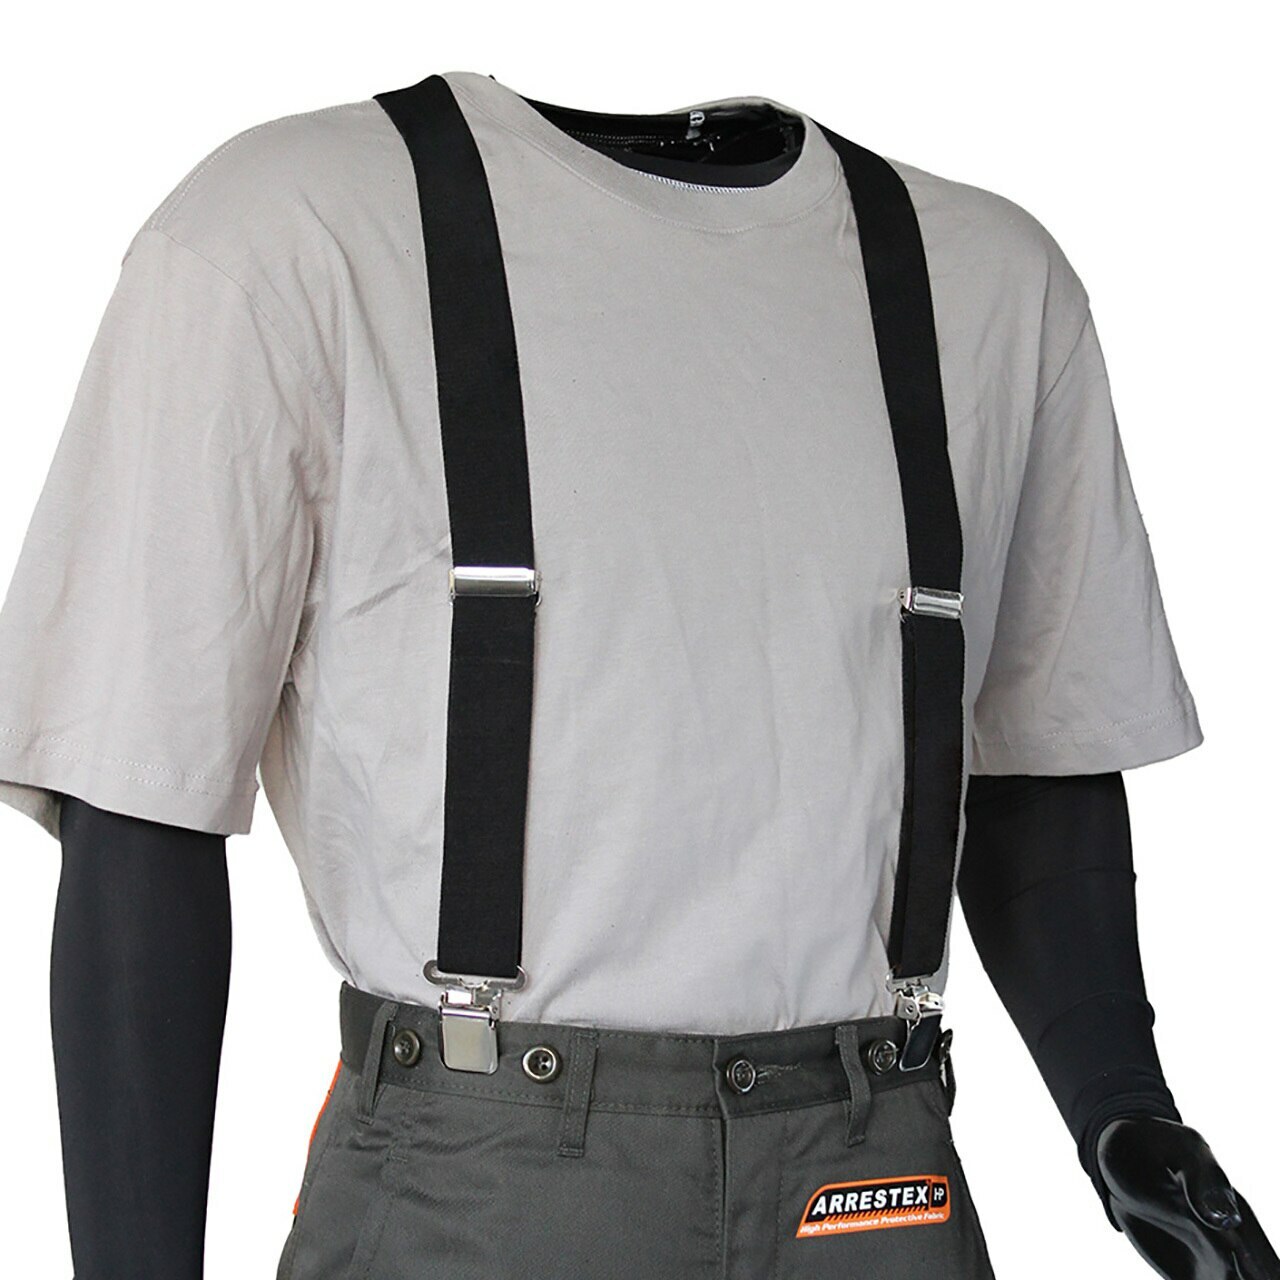 How to attach button loop suspenders to your pants  bubibubieu